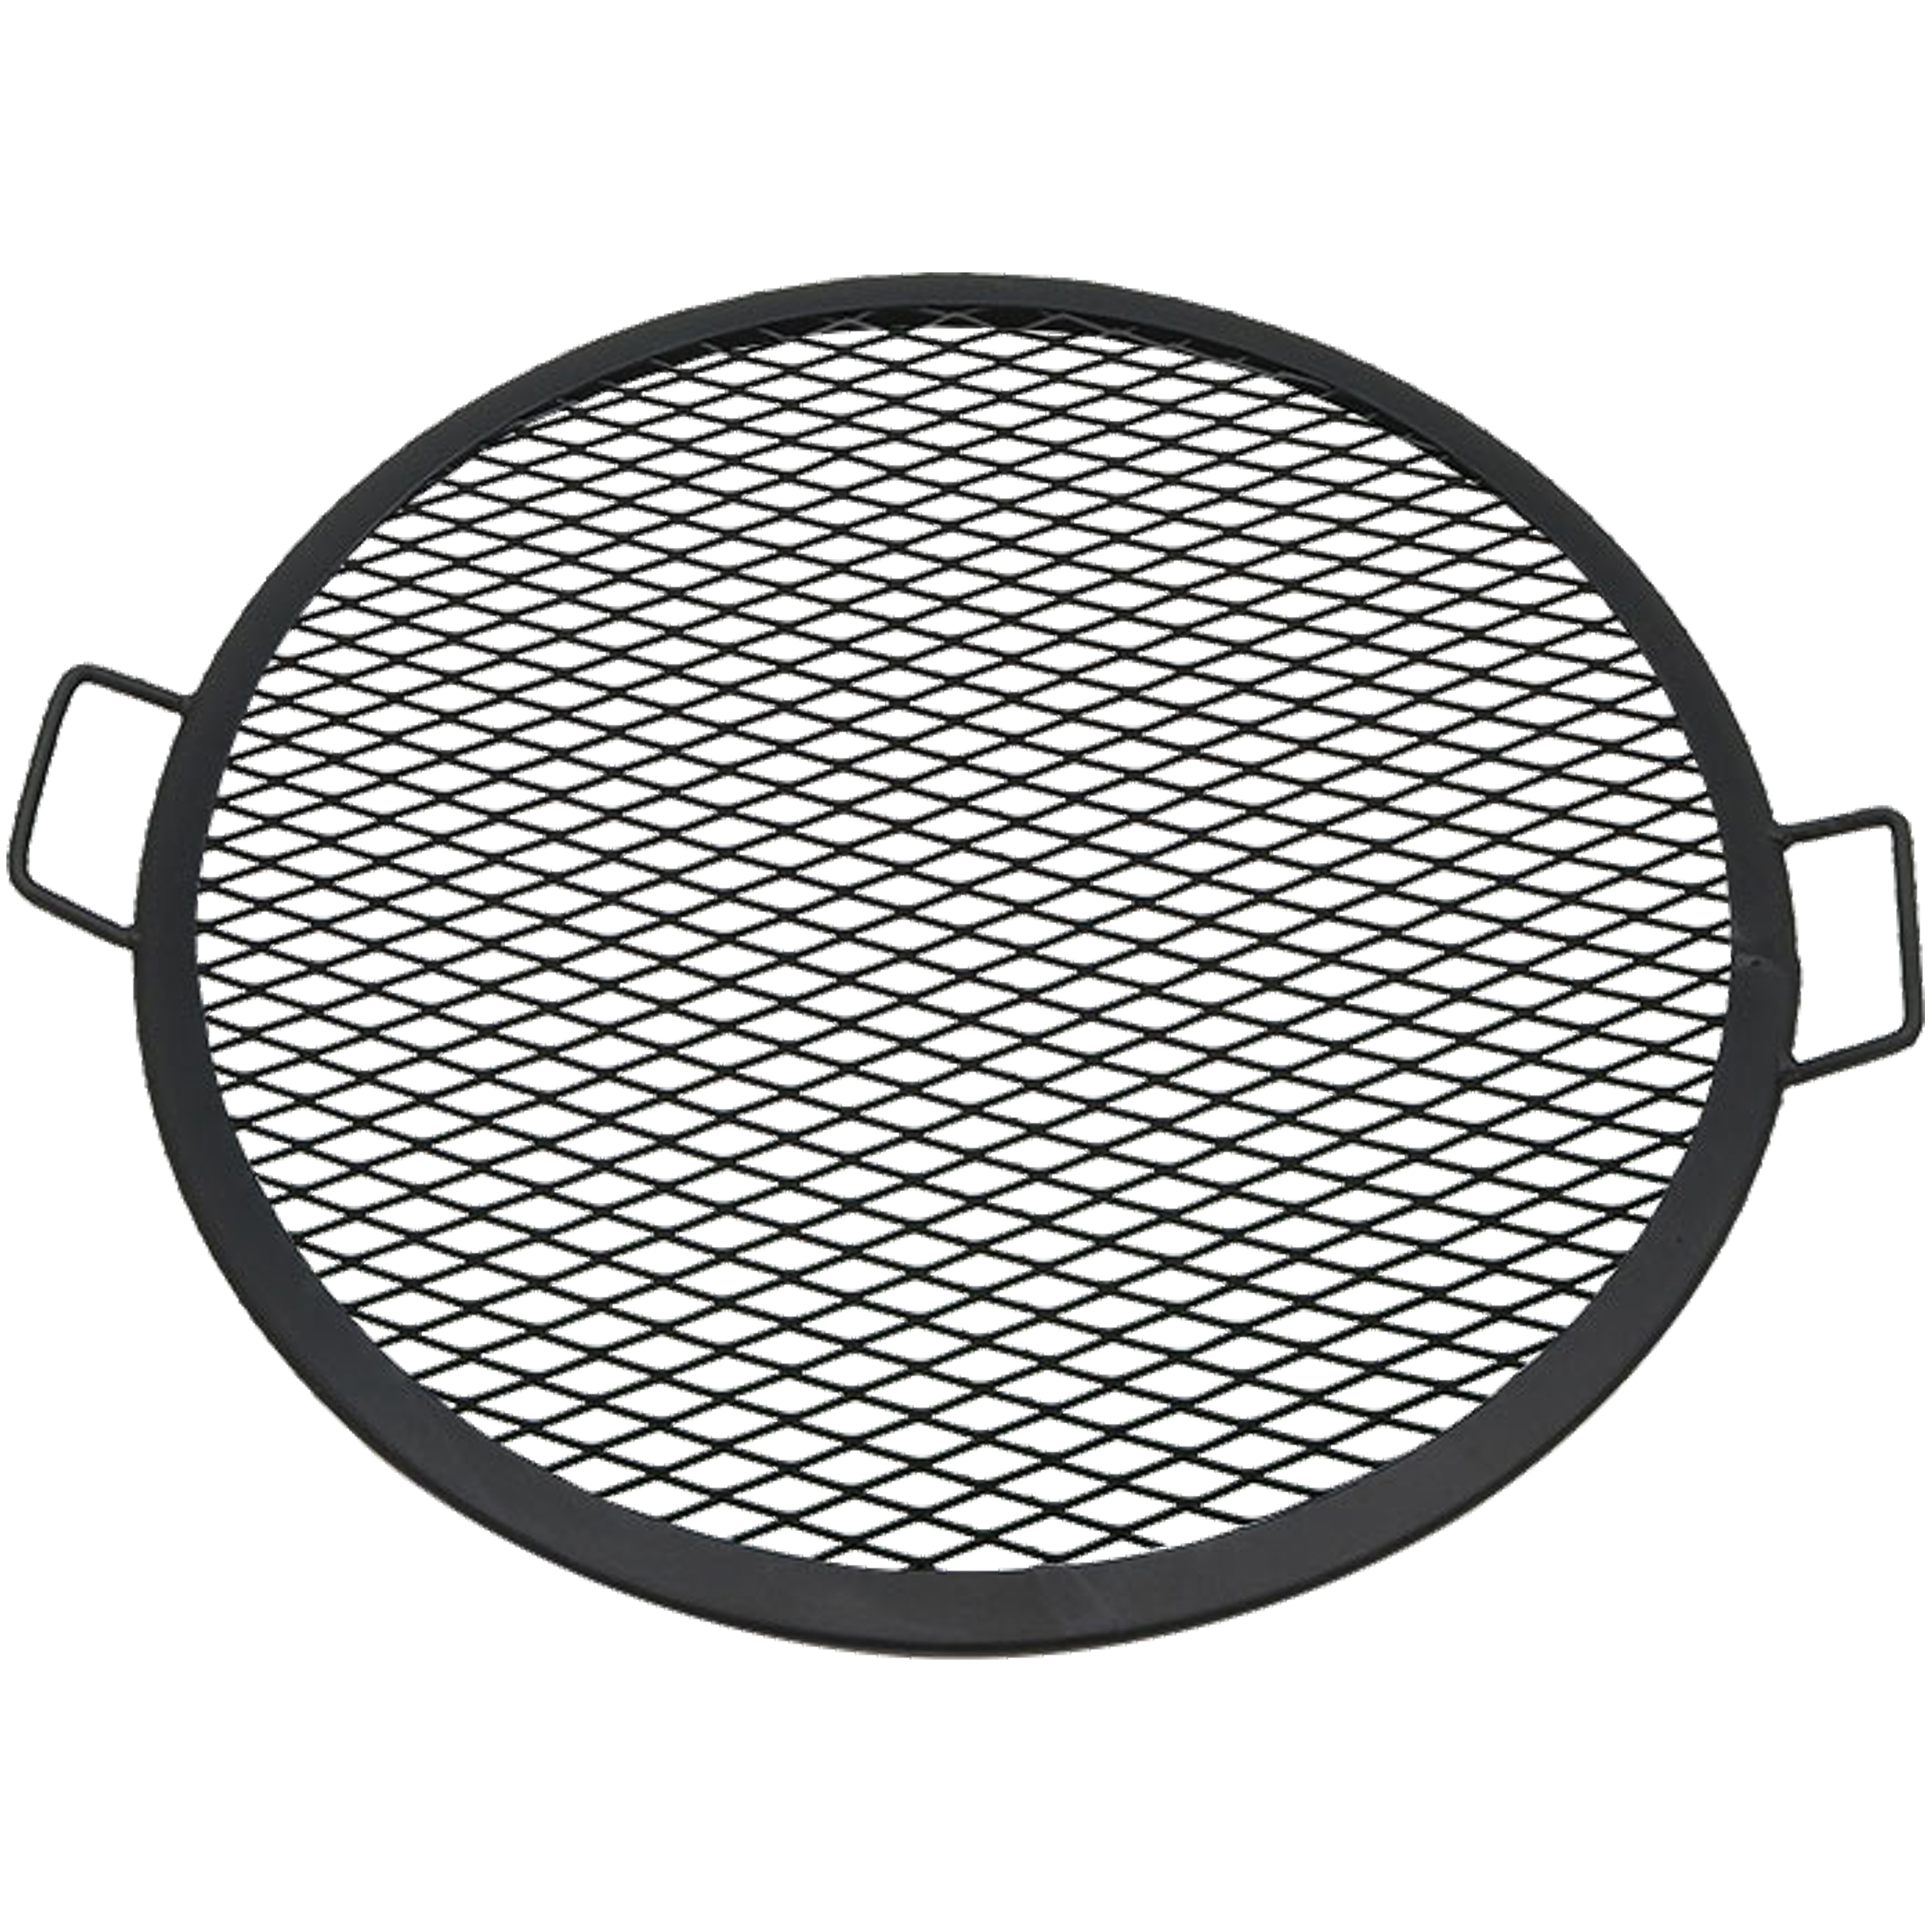 Sunnydaze Fire Pit X-Marks Cooking Grill, 24-Inch